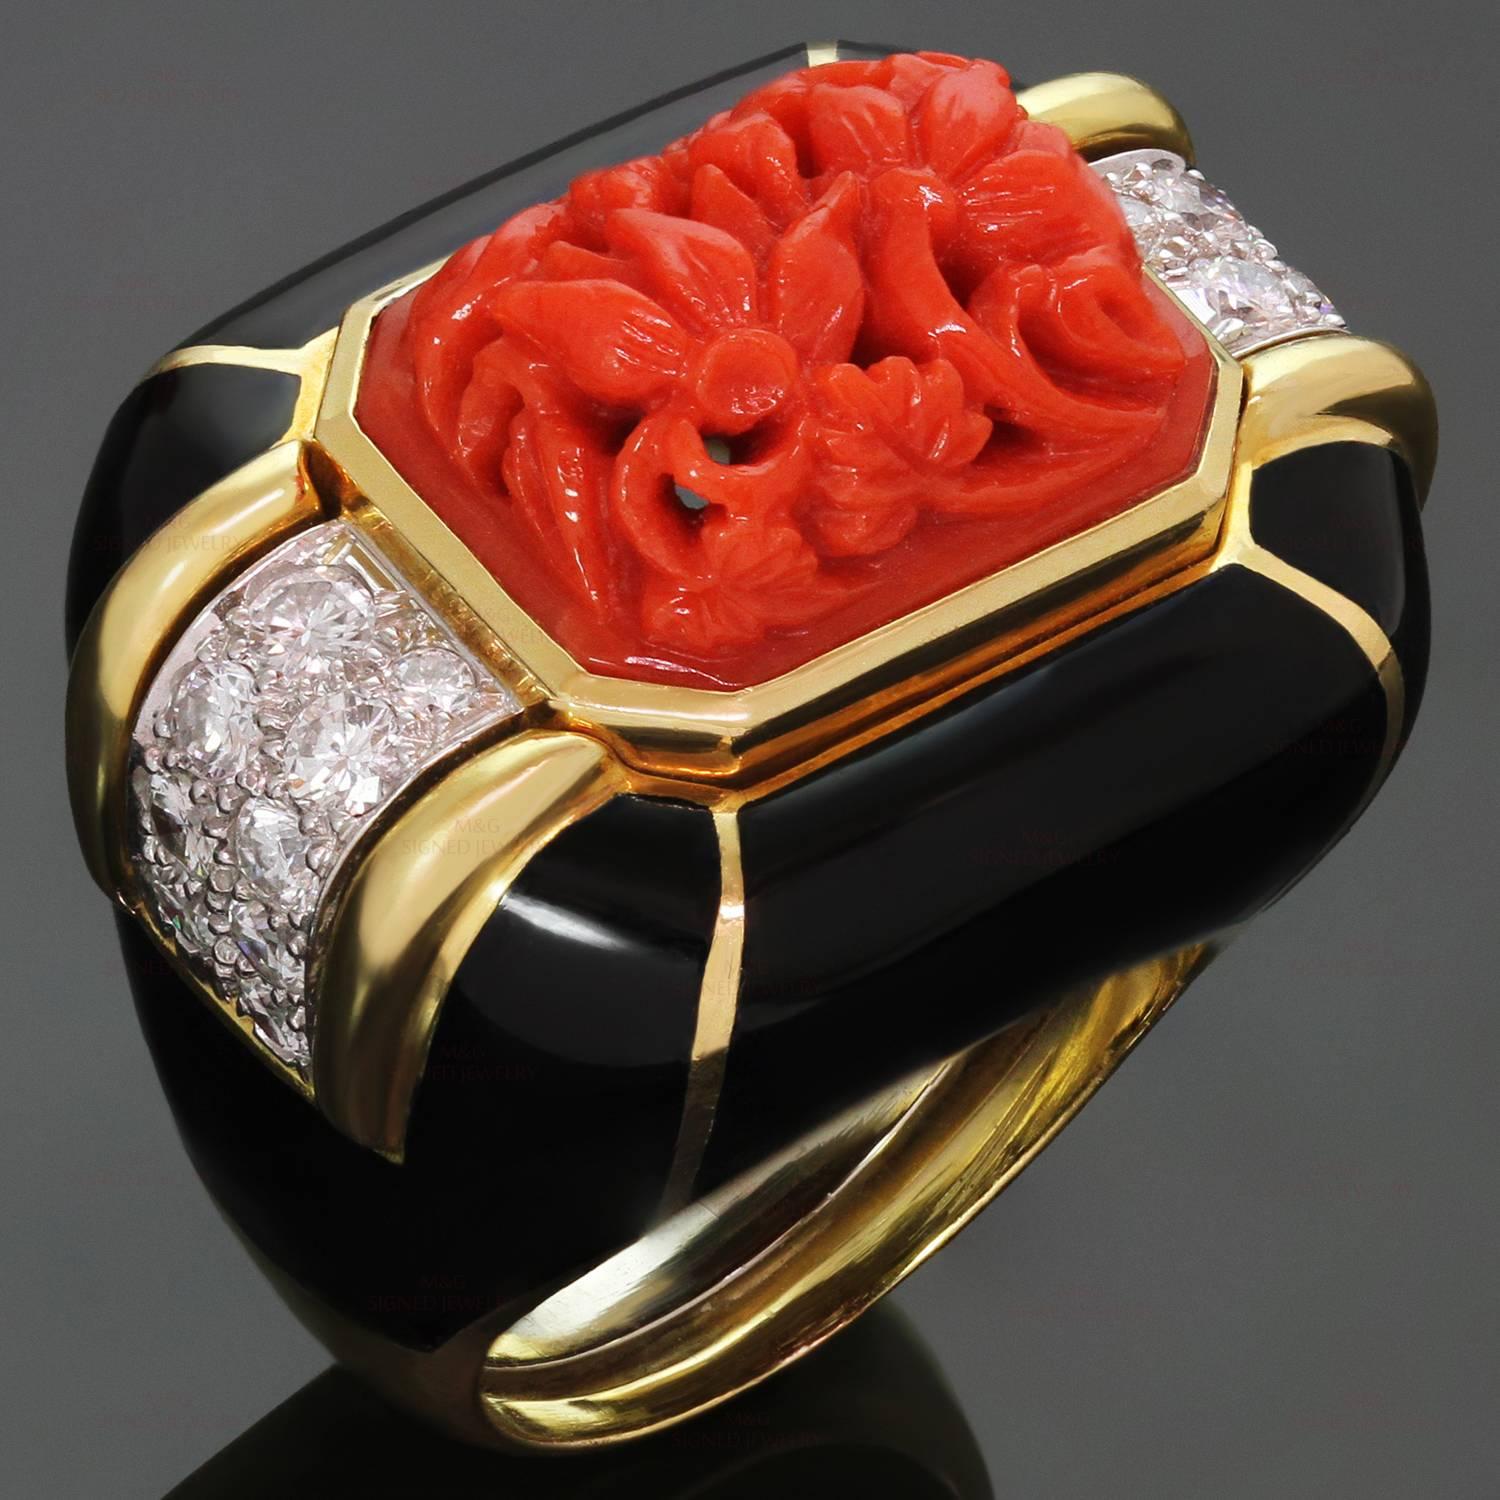 This gorgeous David Webb ring is crafted in 18k yellow gold and platinum and features natural oxblood coral beautifully carved into a floral design and accented with black enamel sides and brilliant-cut round diamonds of an estimated 0.90 carats.